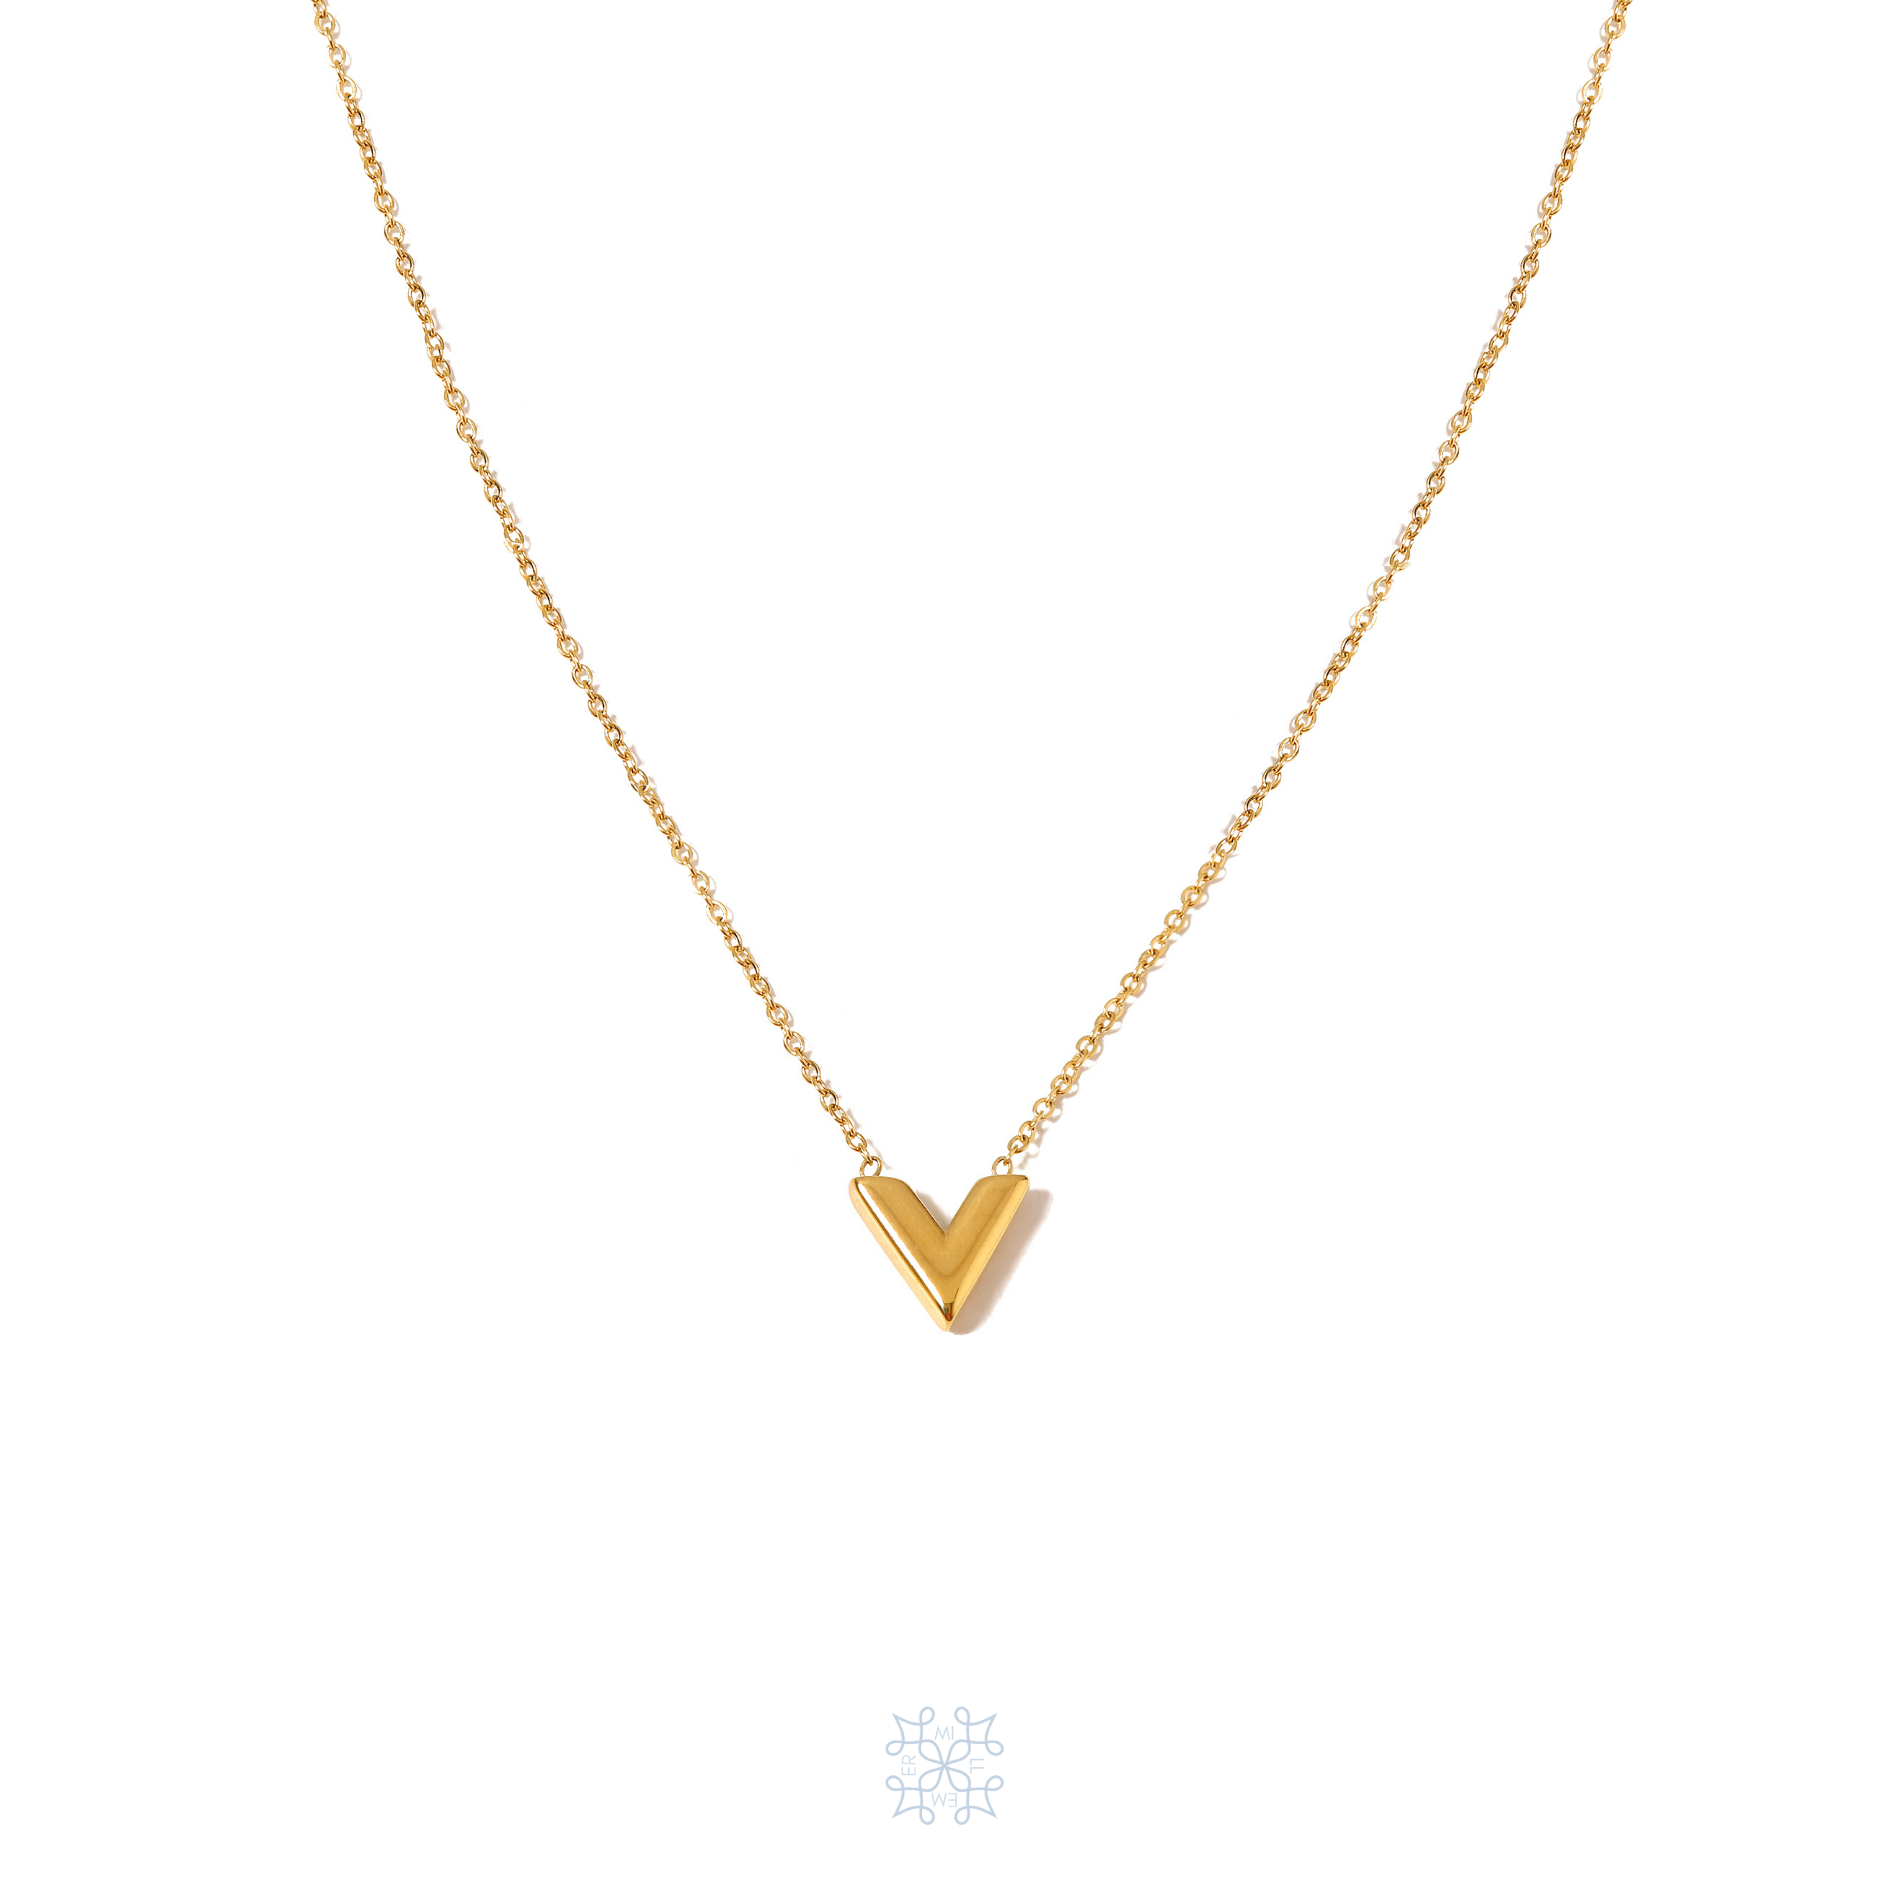 Gold thin chain with leter V in the middle. The chain is attached in each side of the letter V. Victoria Pendant Gold Necklace.